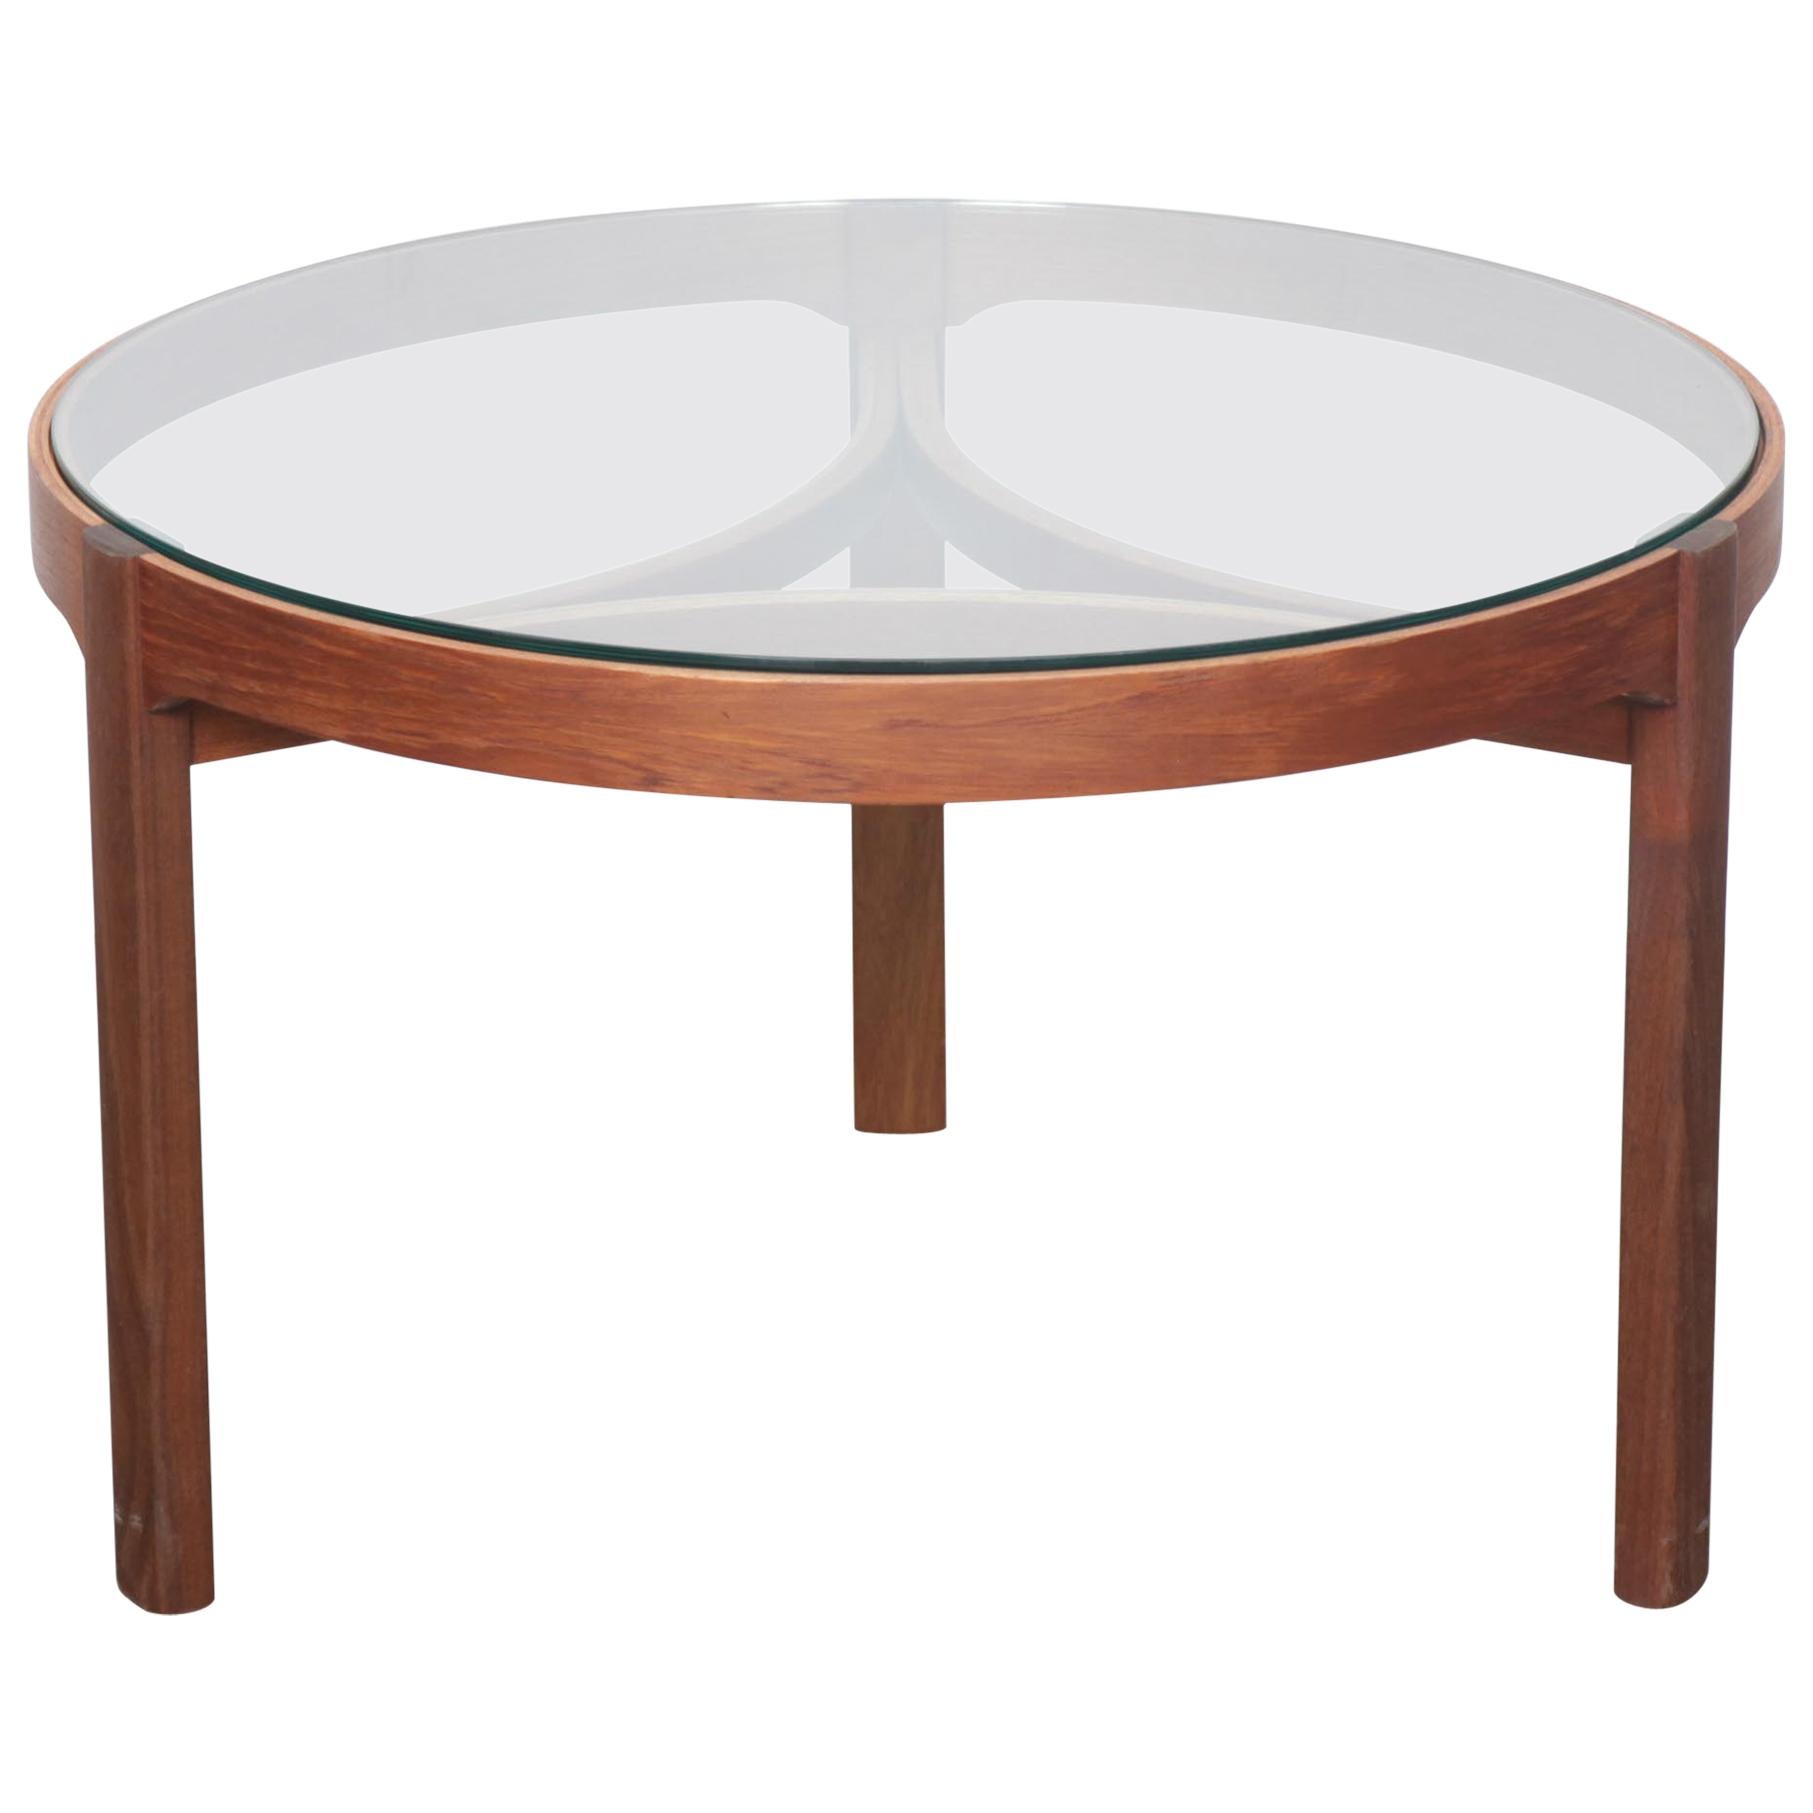 Teak and Glass Top Round Coffee Table by Nathan, England